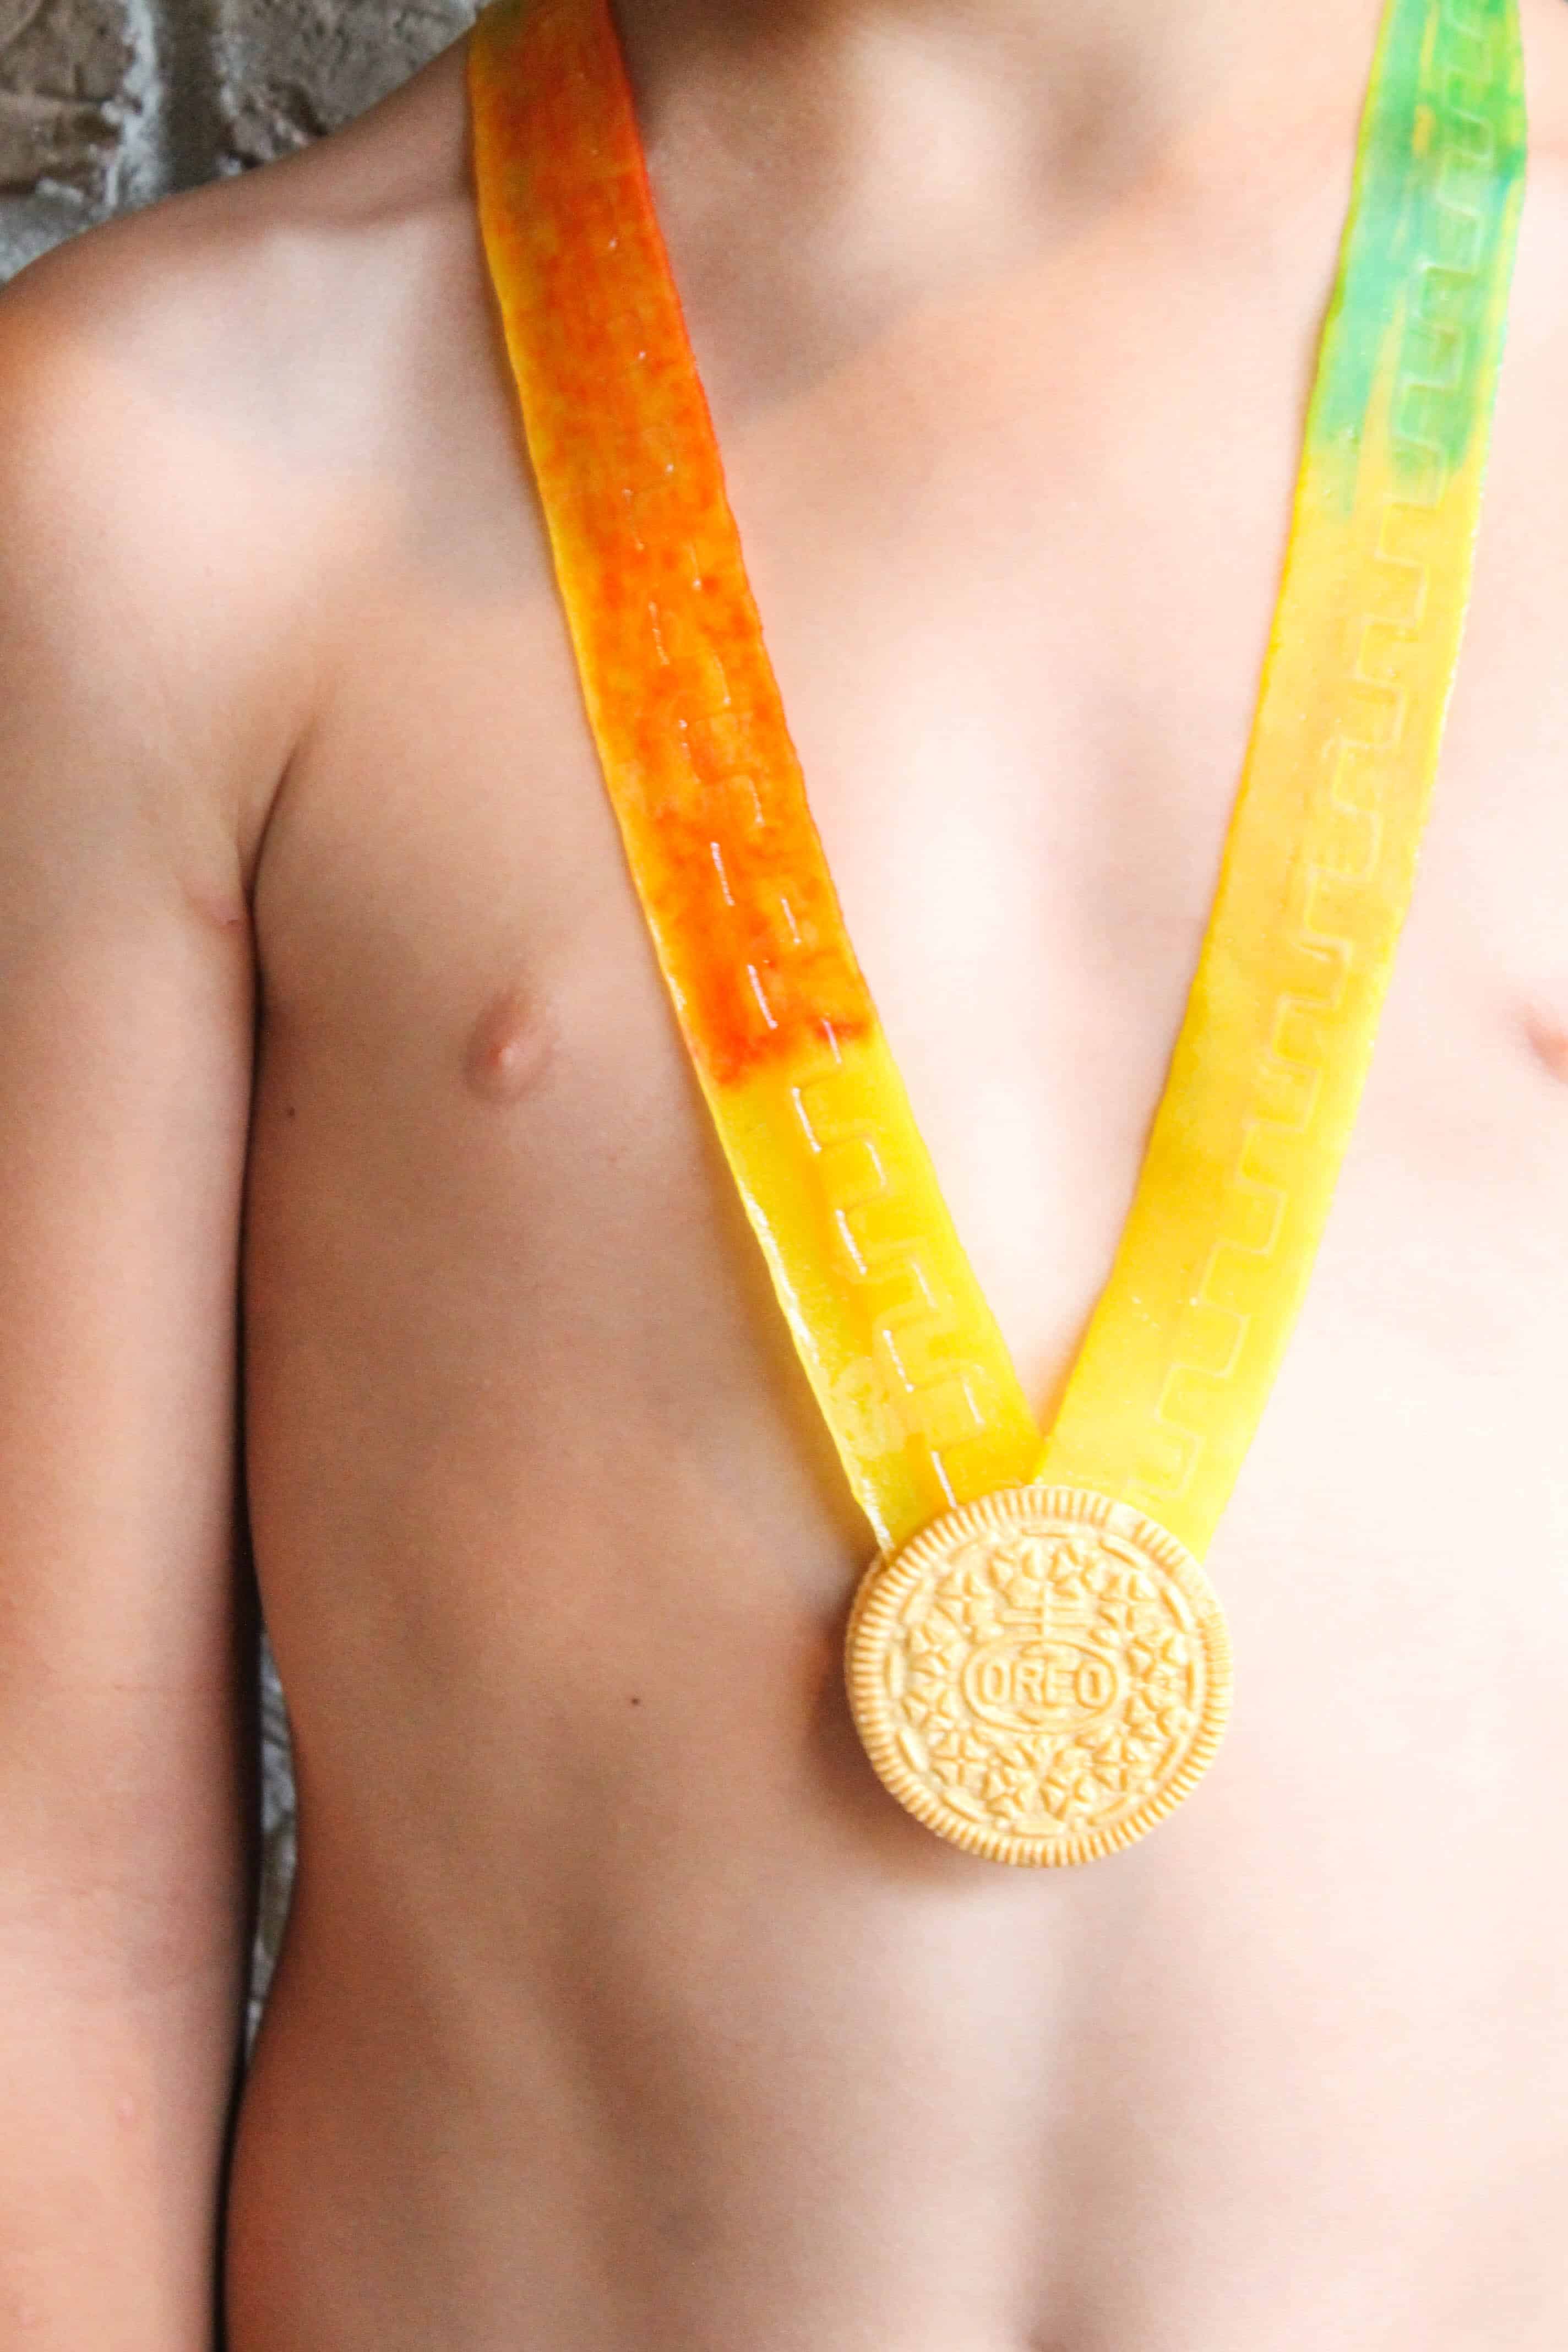 Whip up these Edible Olympic Medals for the Opening Ceremonies! via createcraftlove.com